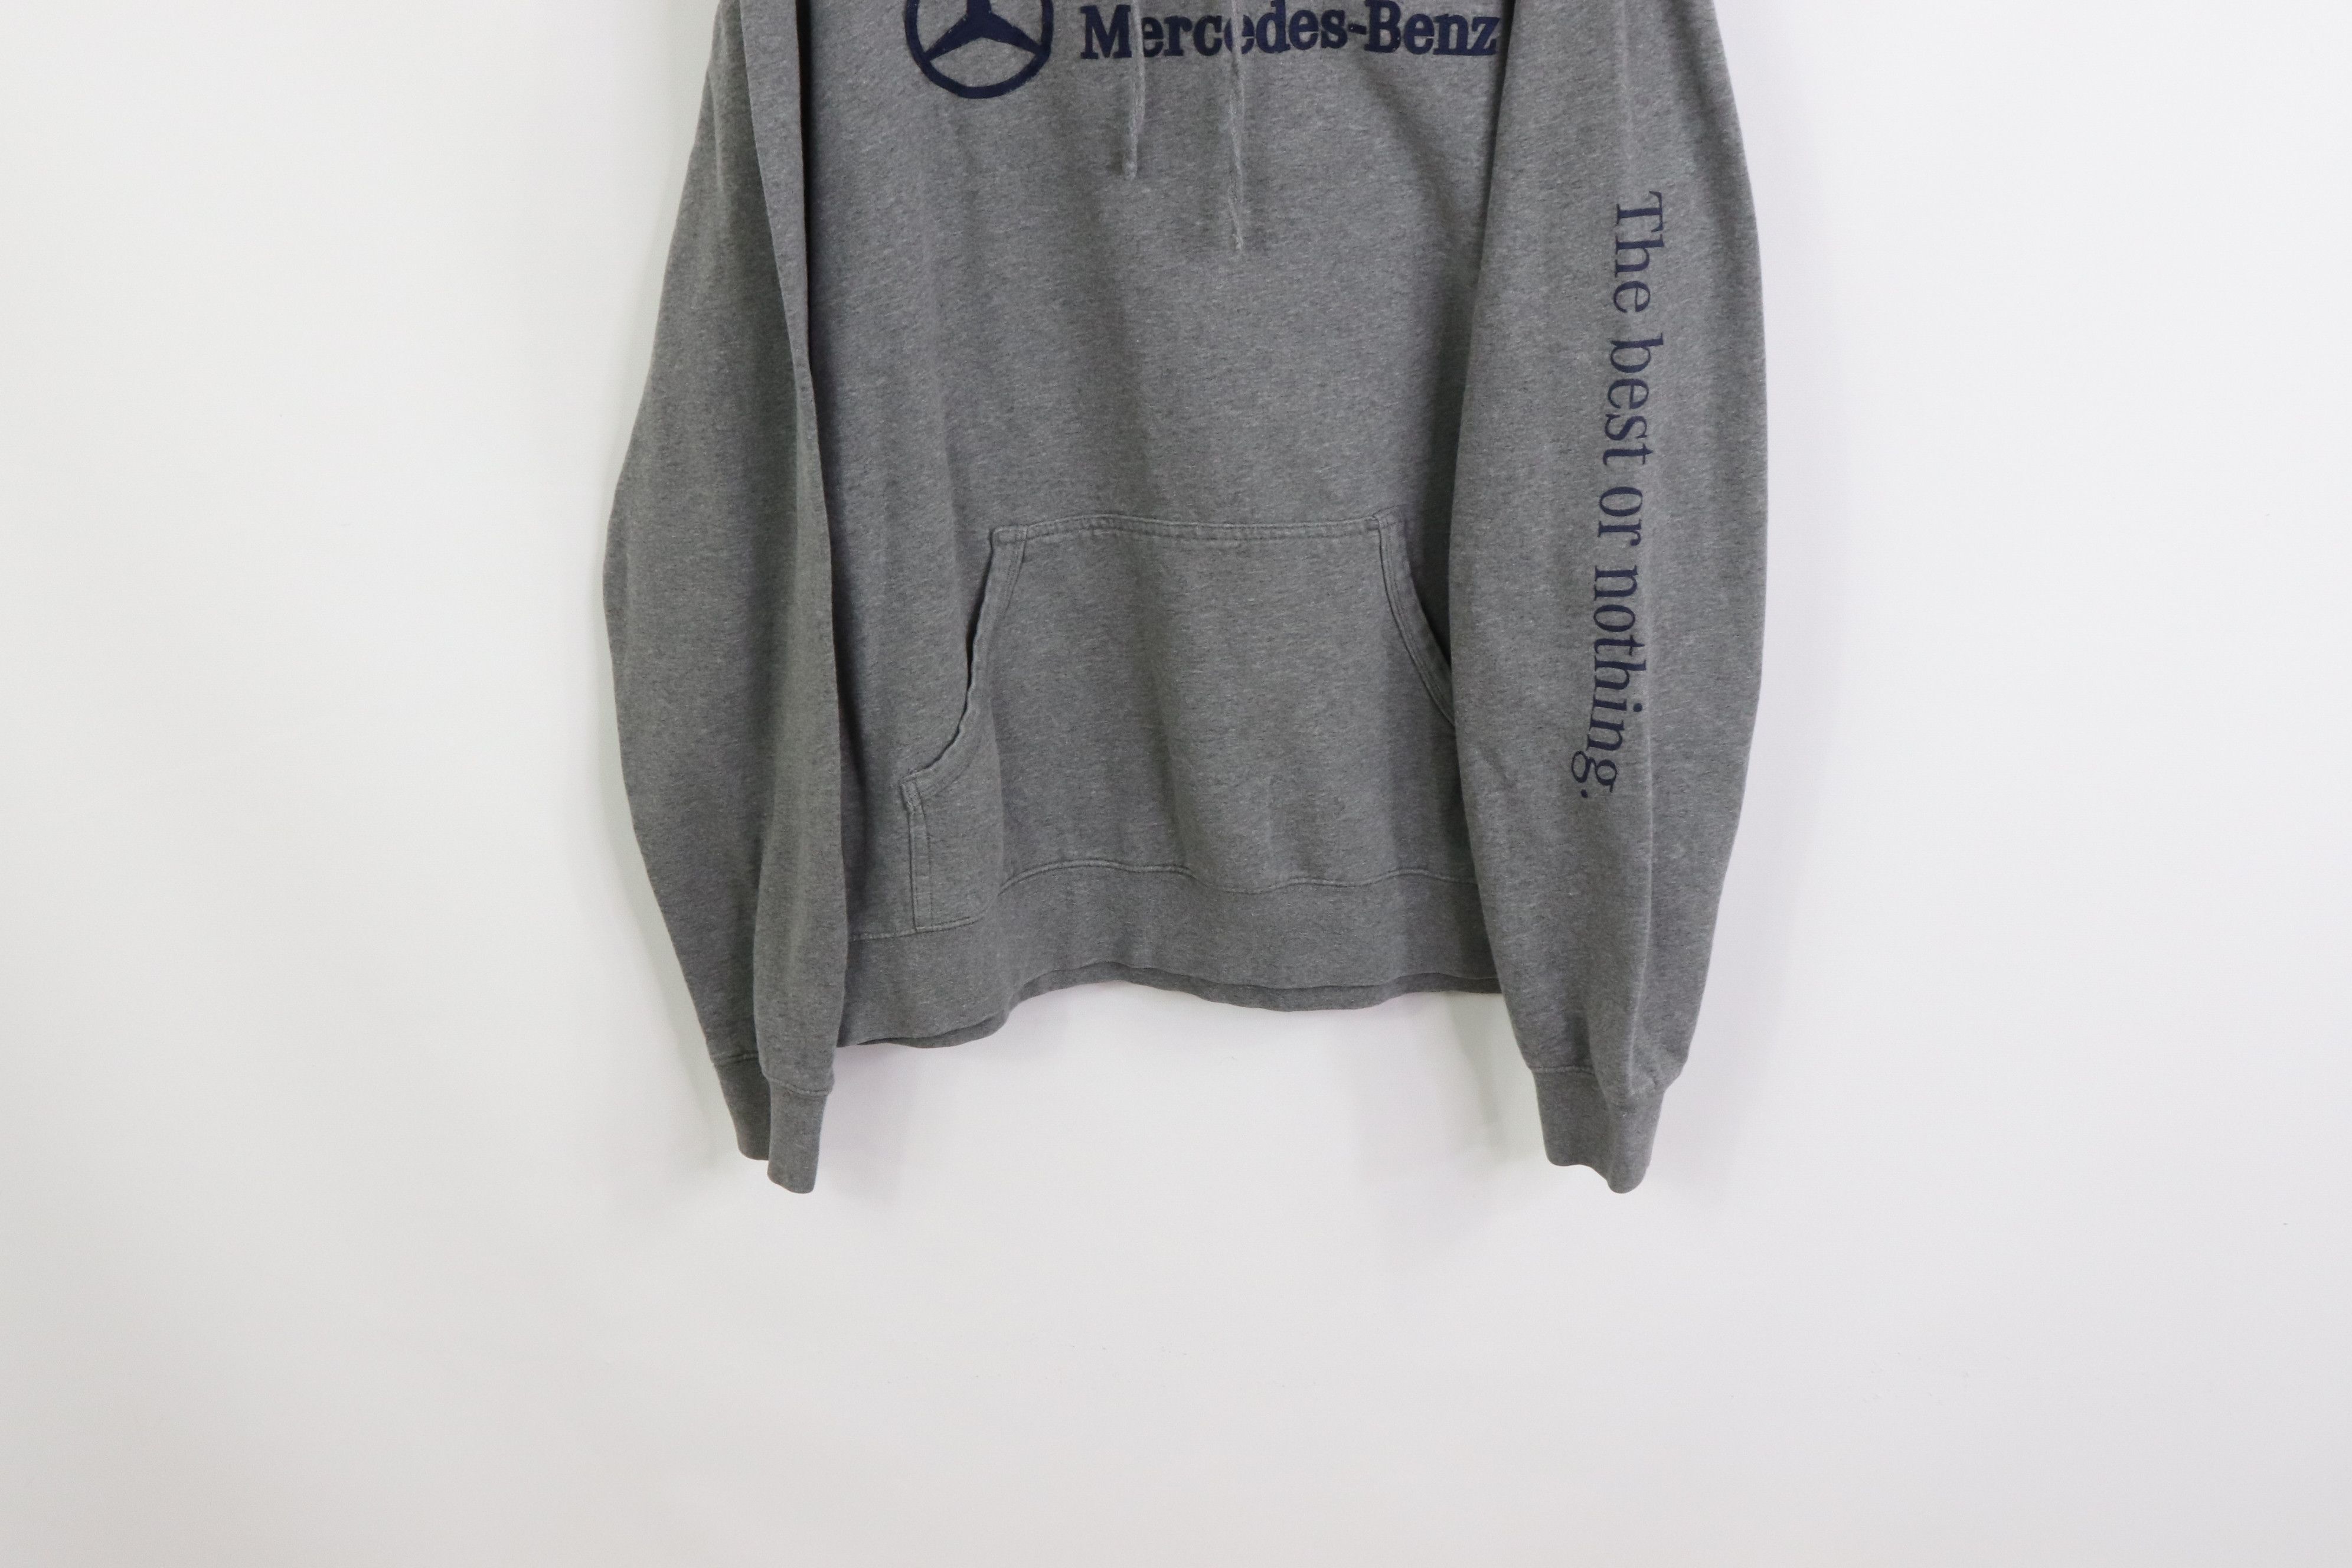 Mercedes Benz Vintage Mercedes Benz Mens XL The Best or Nothing Spell Out Hoodie Sweatshirt Size US XL / EU 56 / 4 - 3 Thumbnail